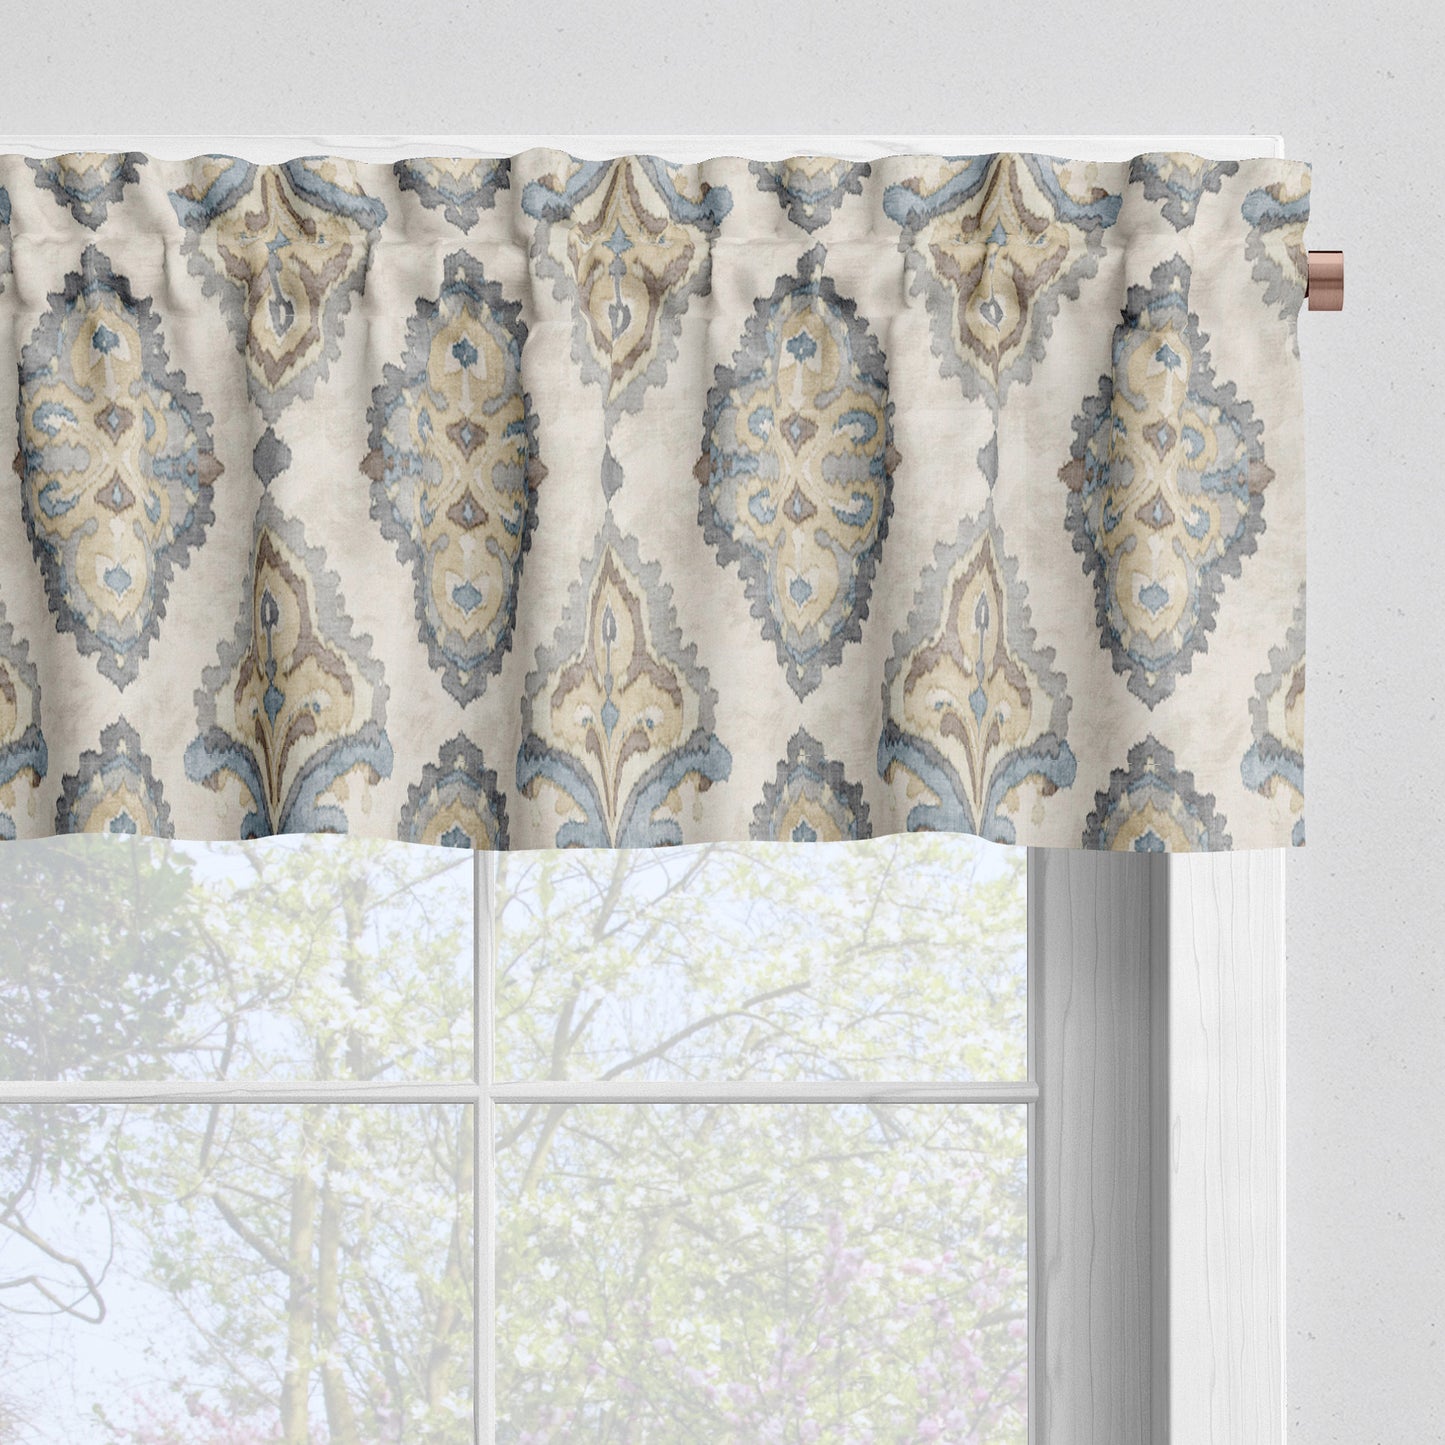 Tailored Valance in Queen Harbor Blue Medallion Watercolor- Large Scale